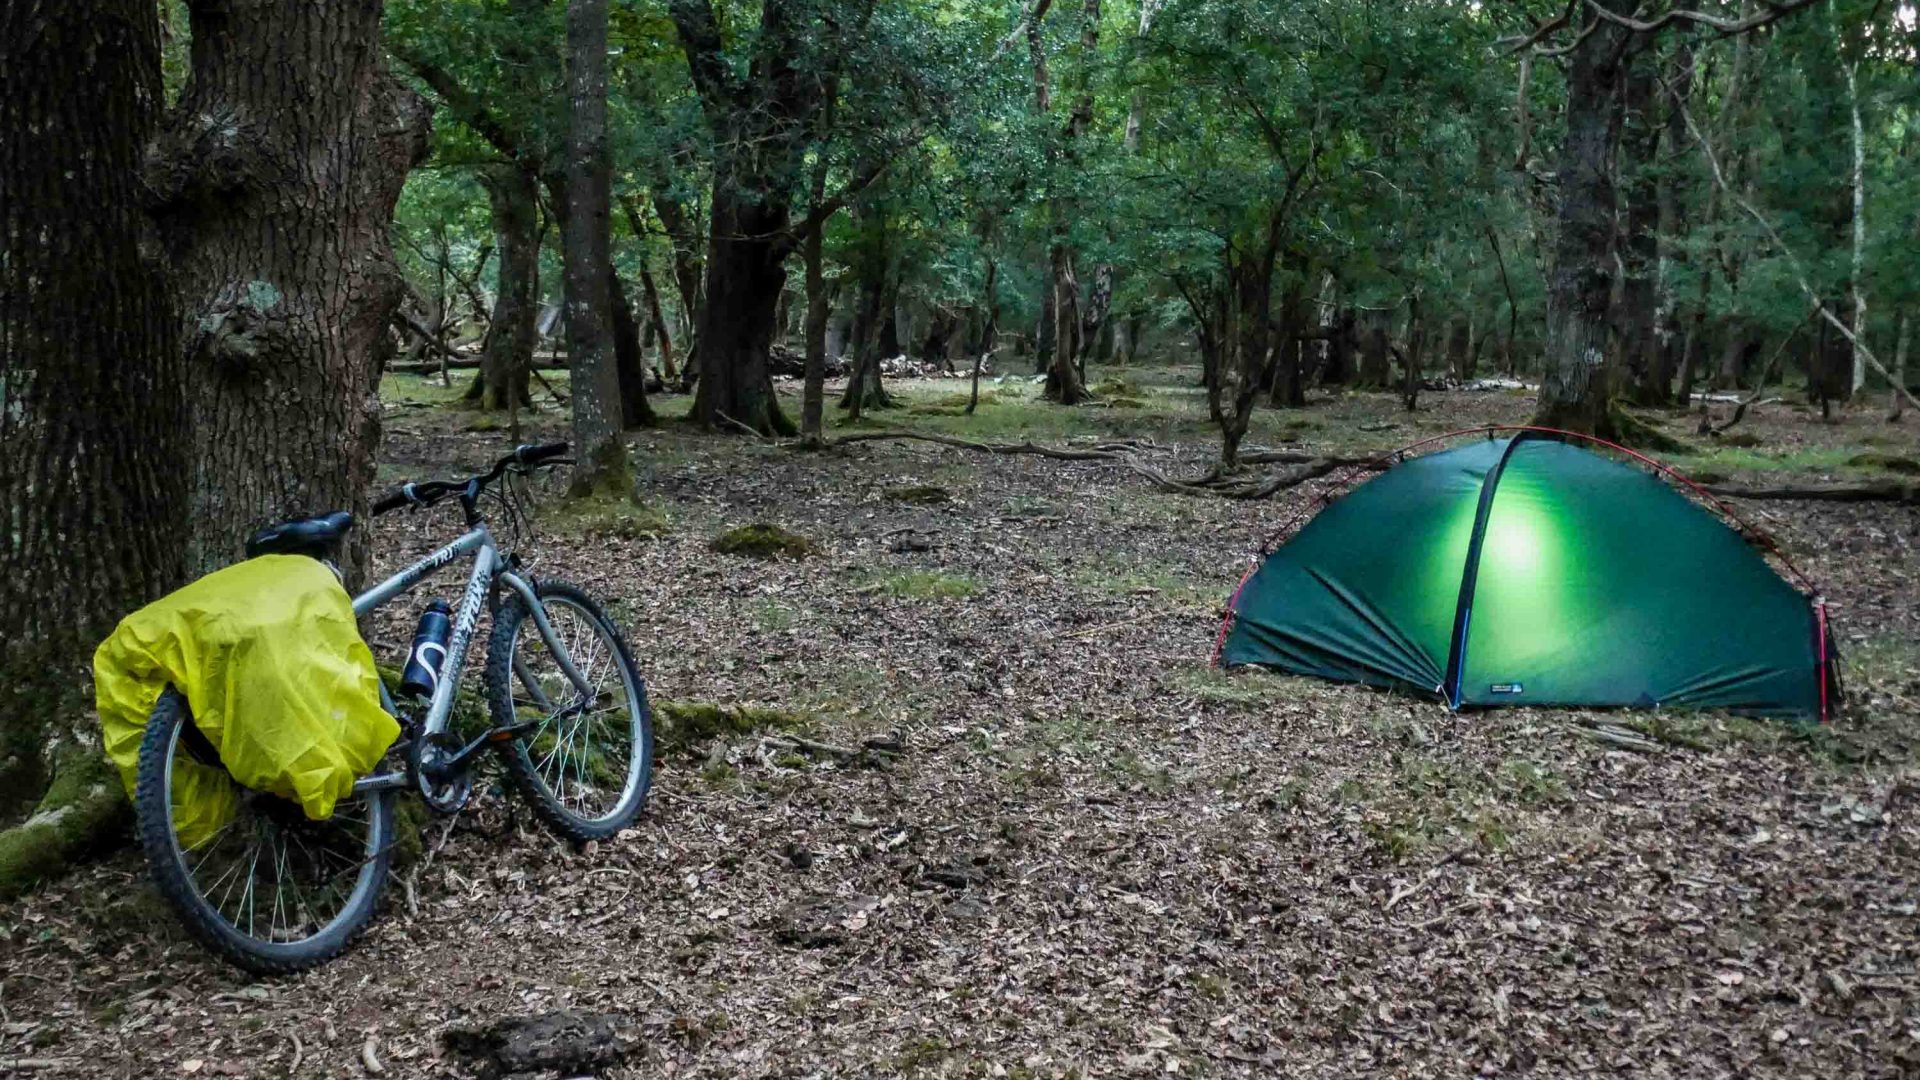 A bike and a tent in a forest.